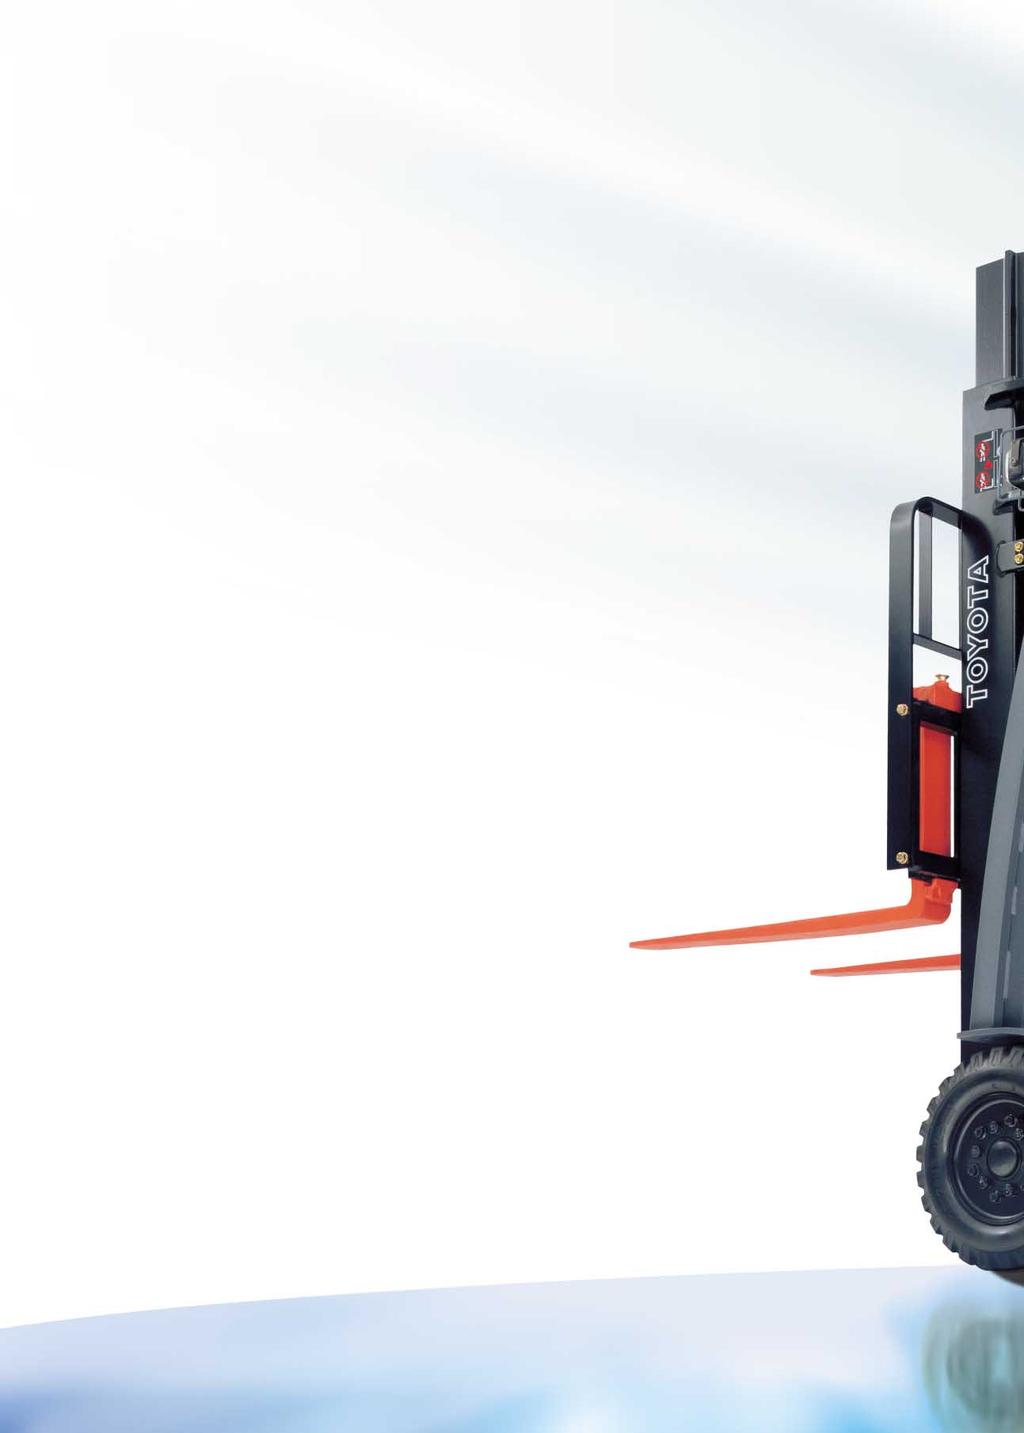 World Class Productivity Toyota has added an array of features to its popular 3-wheeler. Now it ranks among the most productive forklifts in the world today.